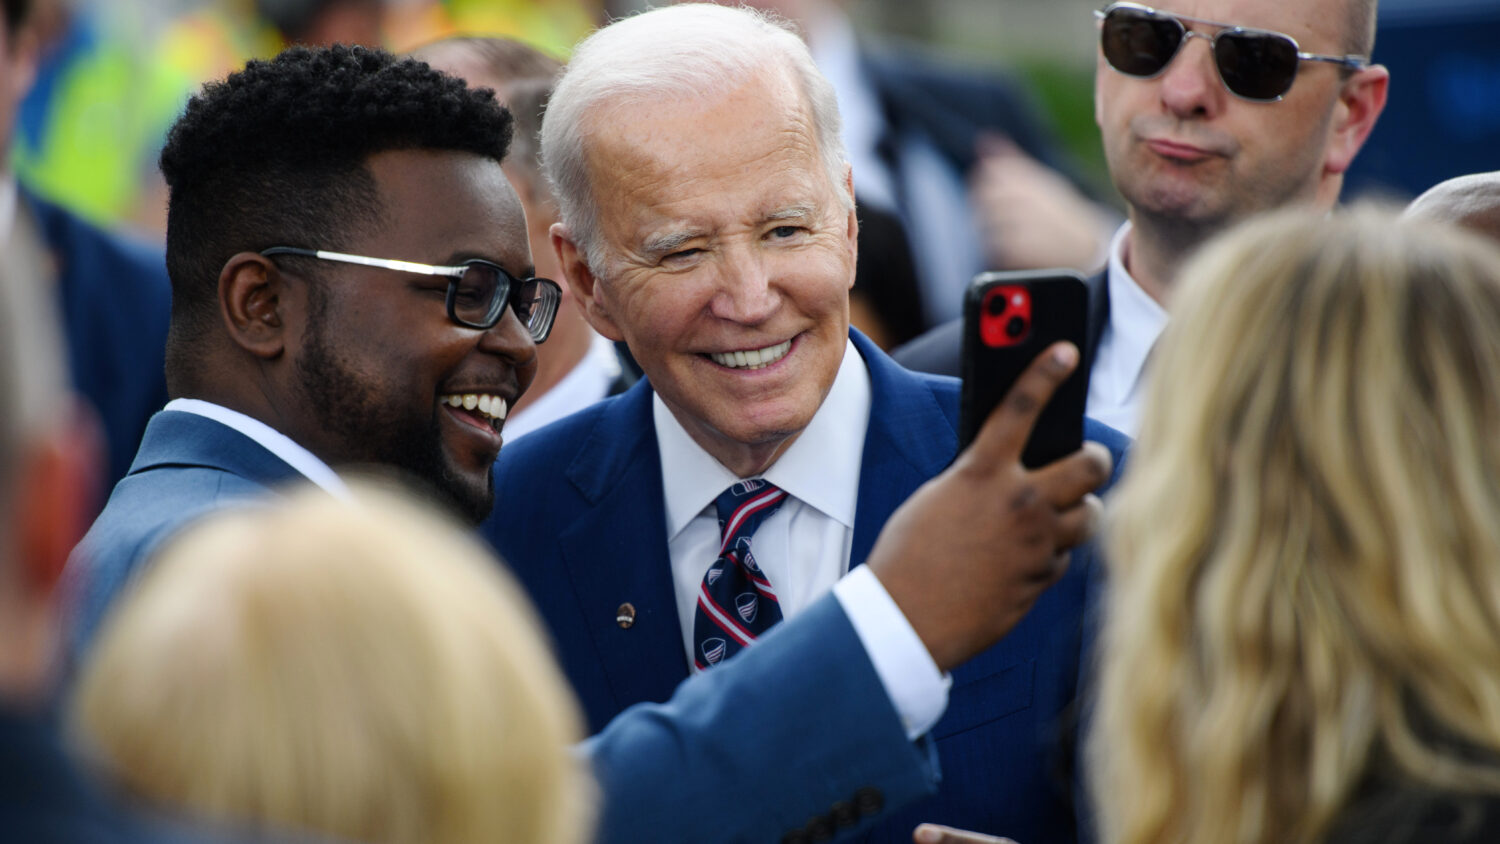 Swing states pivotal as Biden aims to secure re-election (Credits: WAMU)